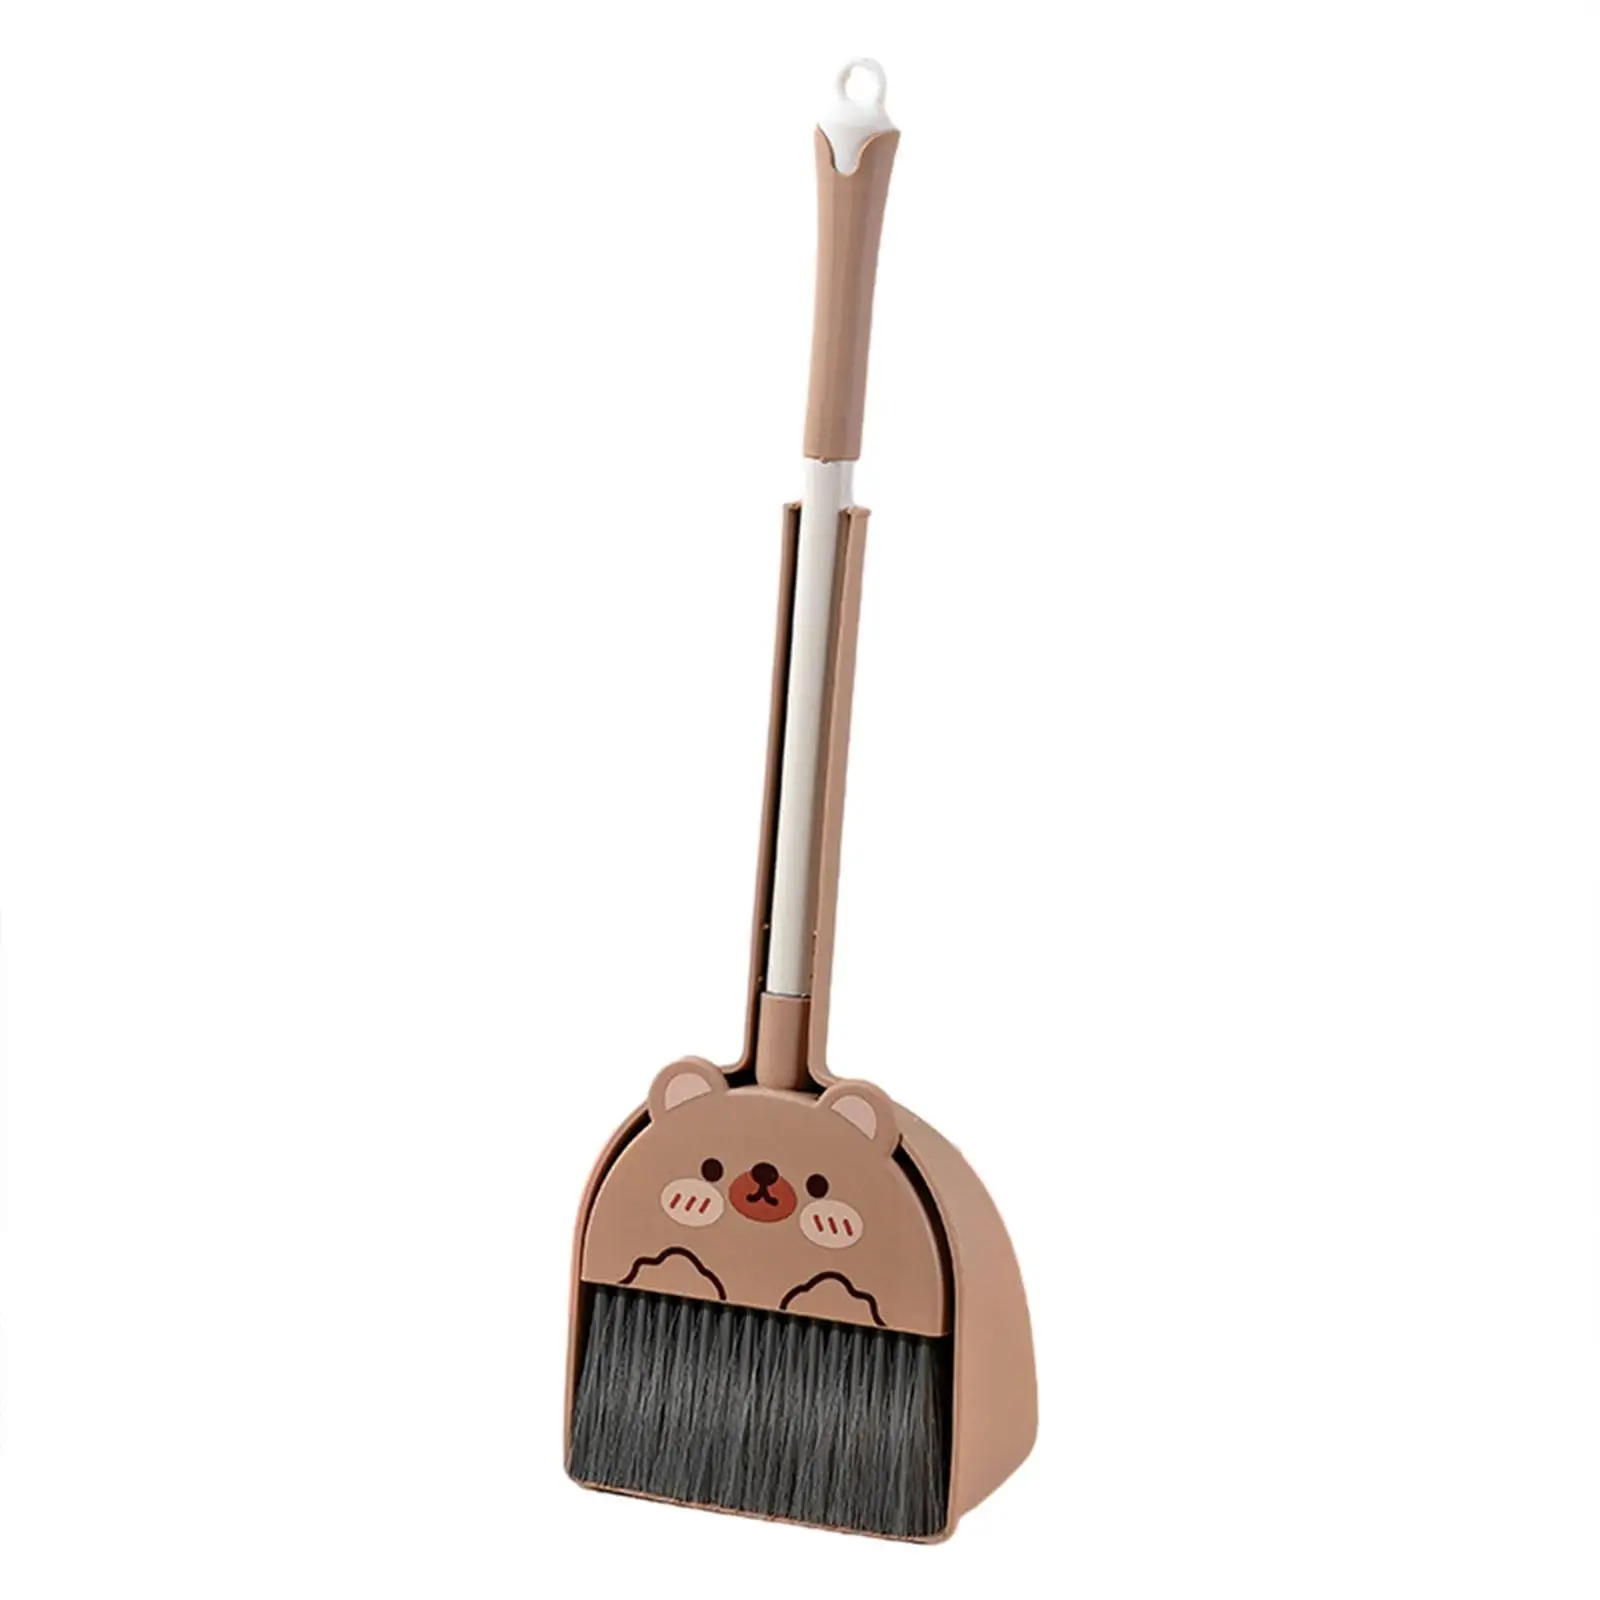 Small Broom and Dustpan Set Novelty Kids Cleaning Set for Age 3-6 Kids Girls